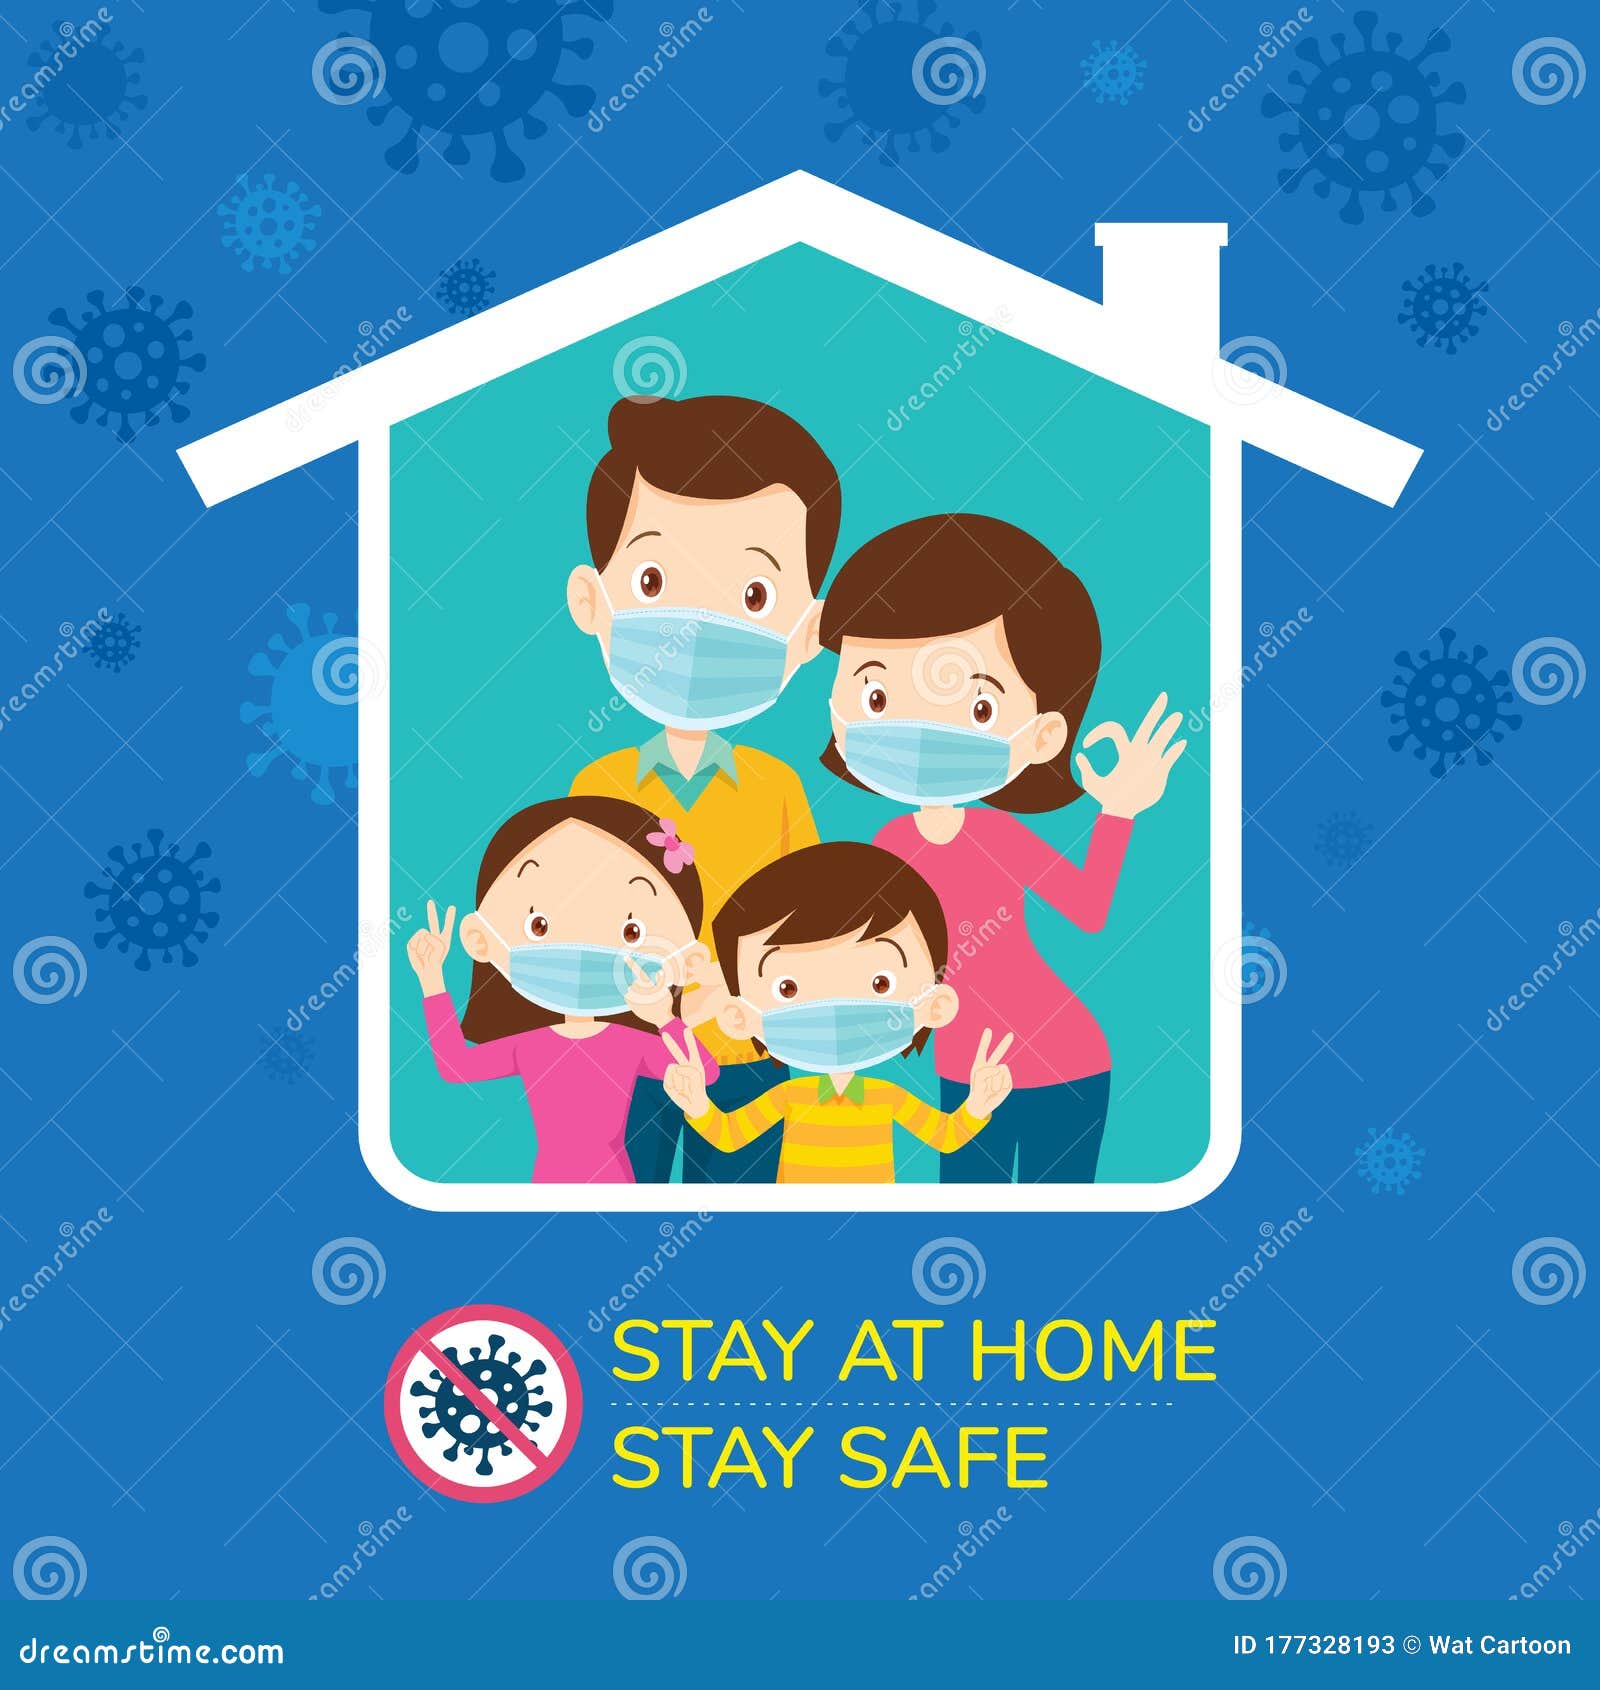 Stay At Home Stay Safe,Corona Virus ,Covid-19 Campaign To Stay At Home  Stock Vector - Illustration Of Care, Dust: 177328193